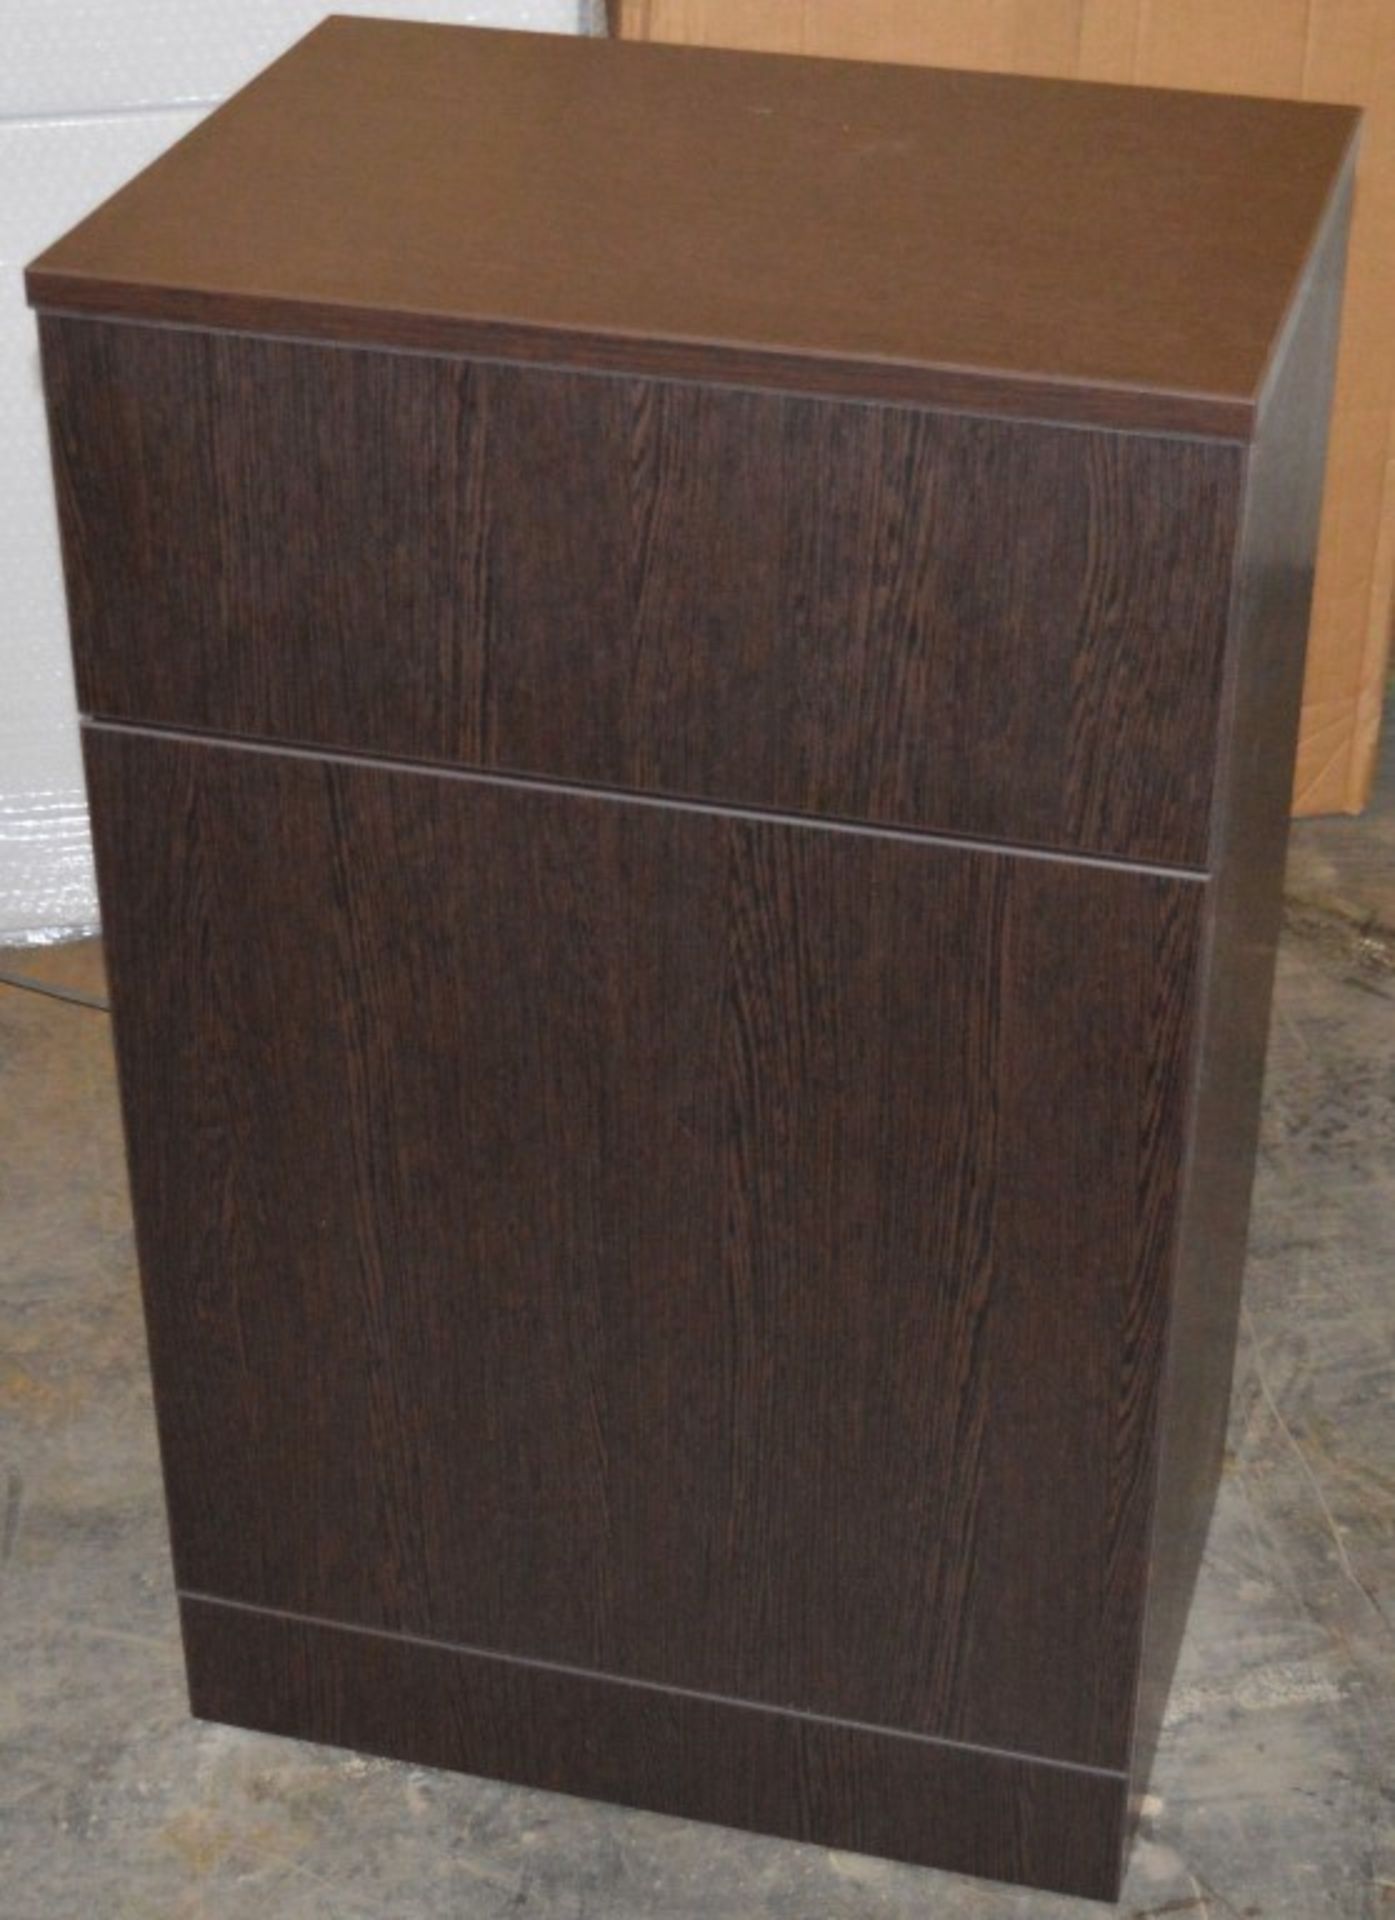 1 x Venizia BTW Toilet Pan Unit in Wenge With Concealed Cistern - 500mm Width - Brand New Boxed - Image 6 of 6